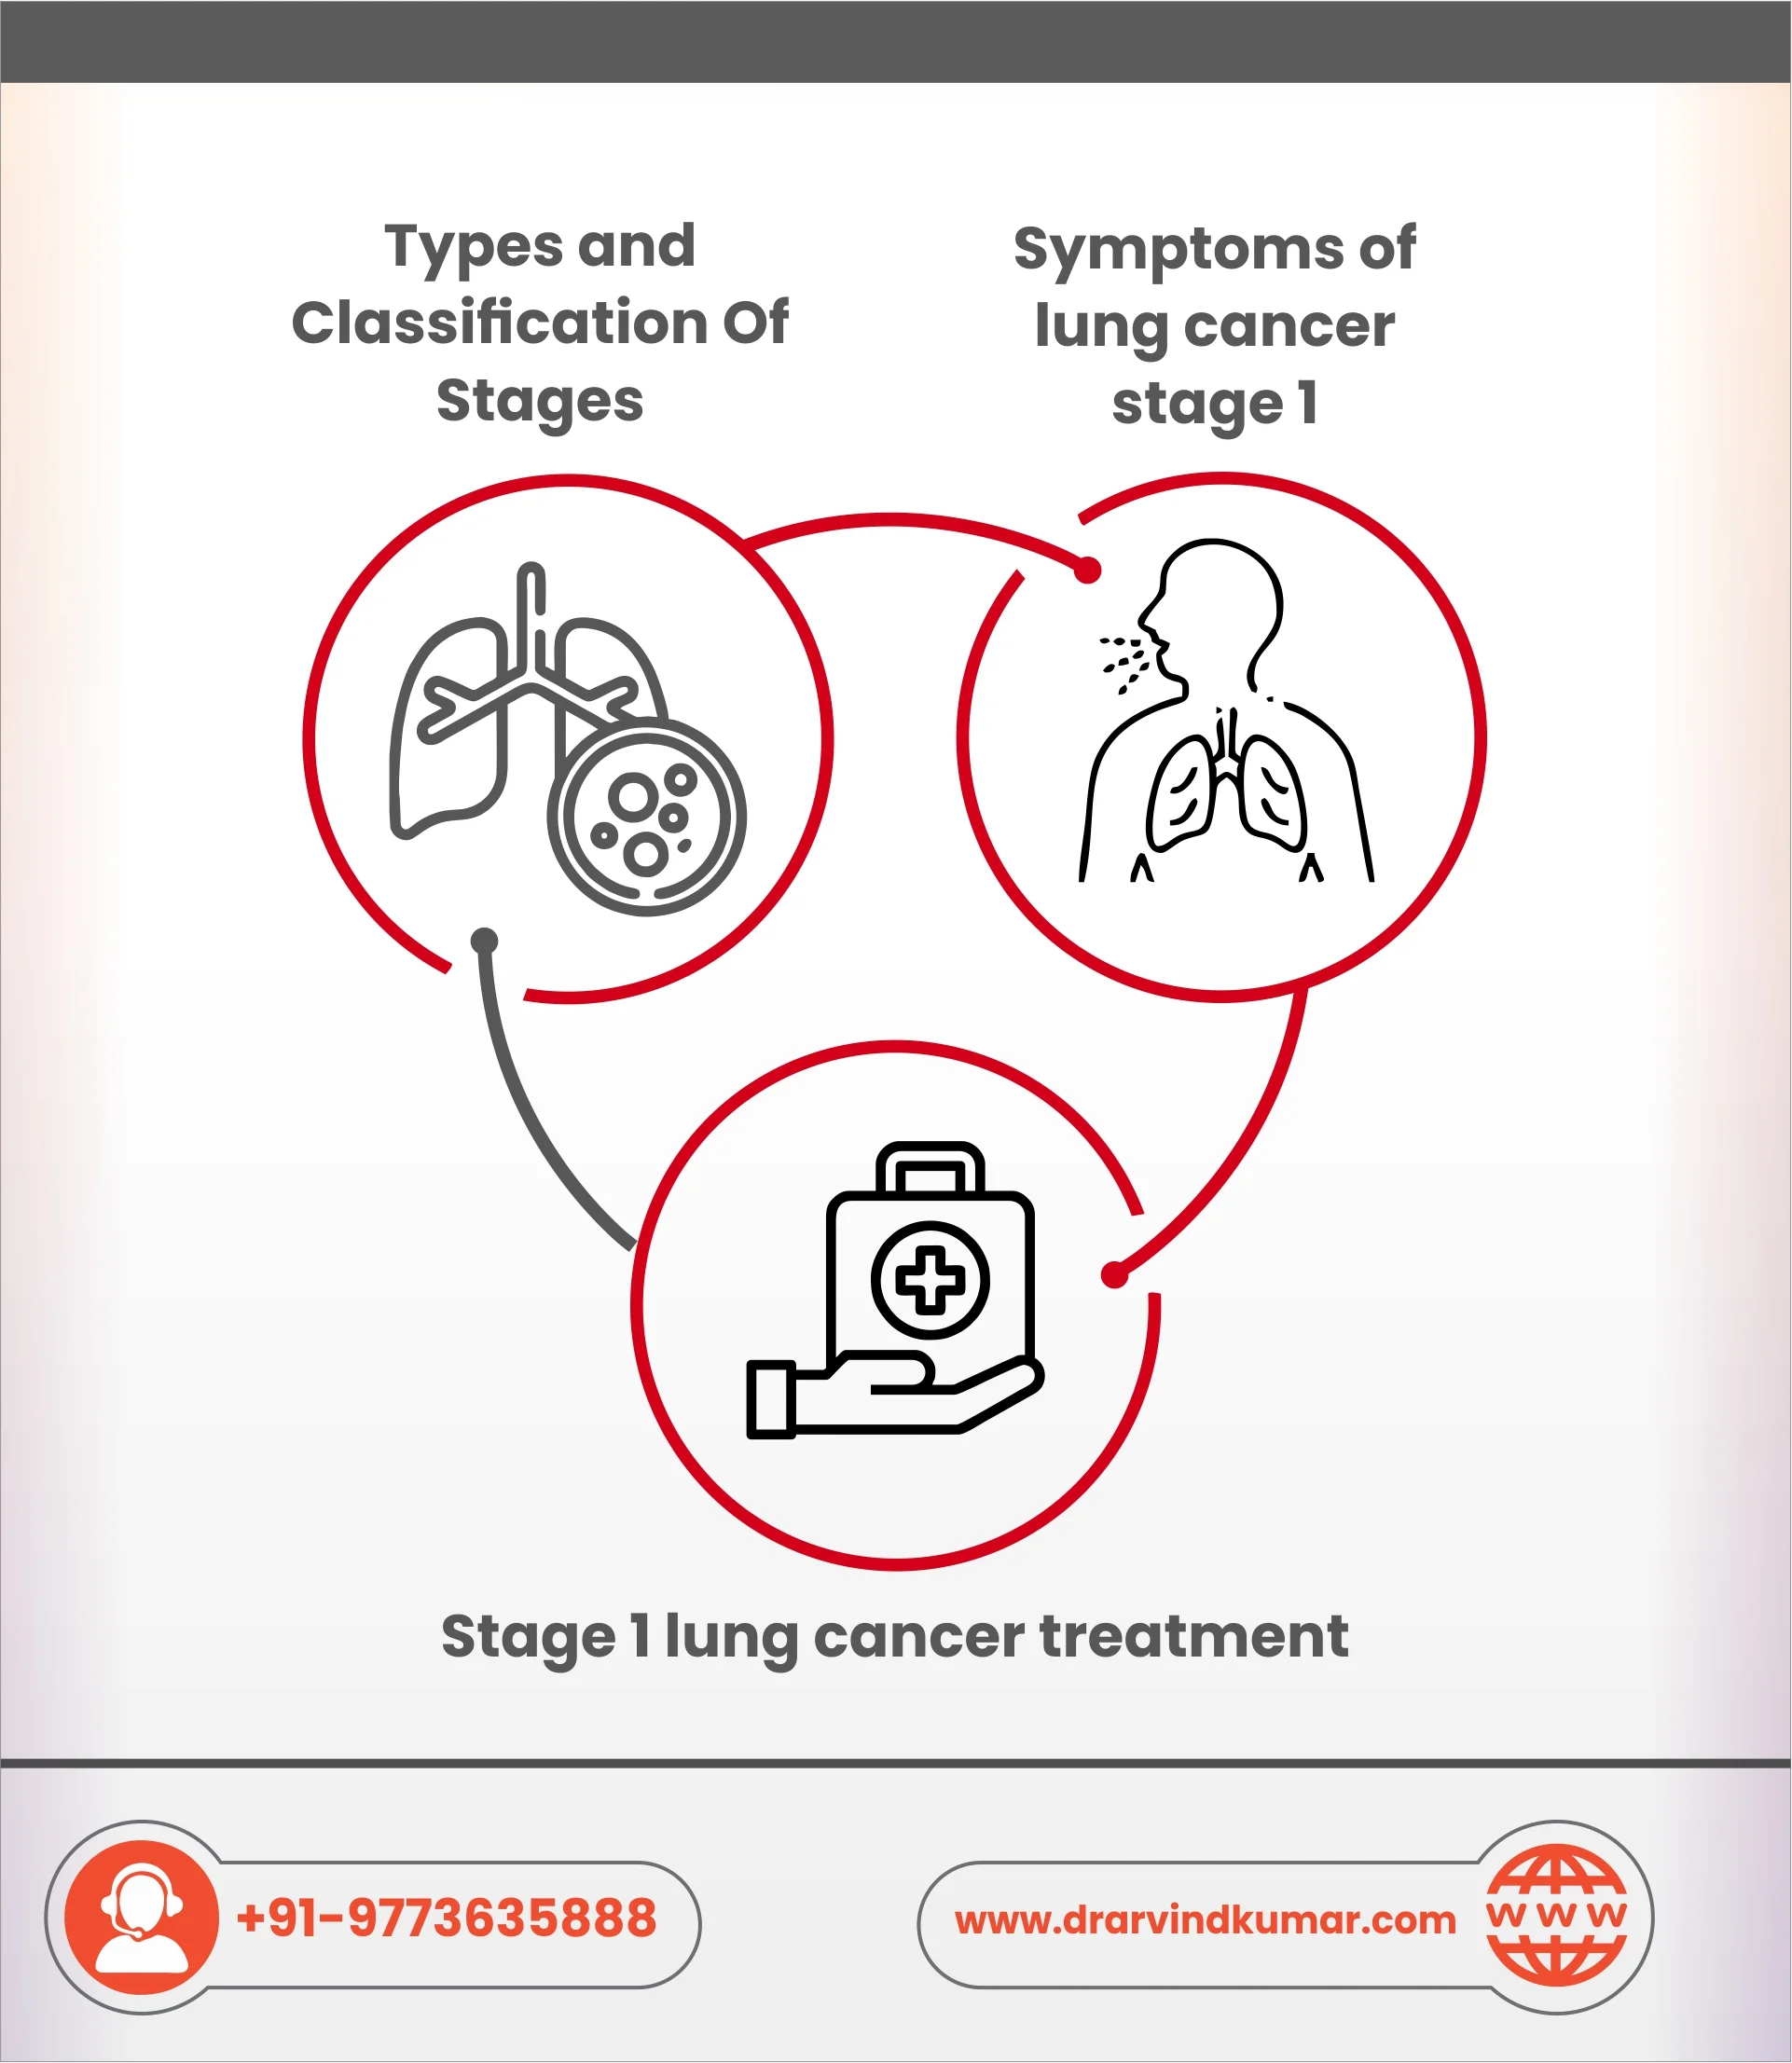 How Do You Know If You Have Stage 1 Lung Cancer?